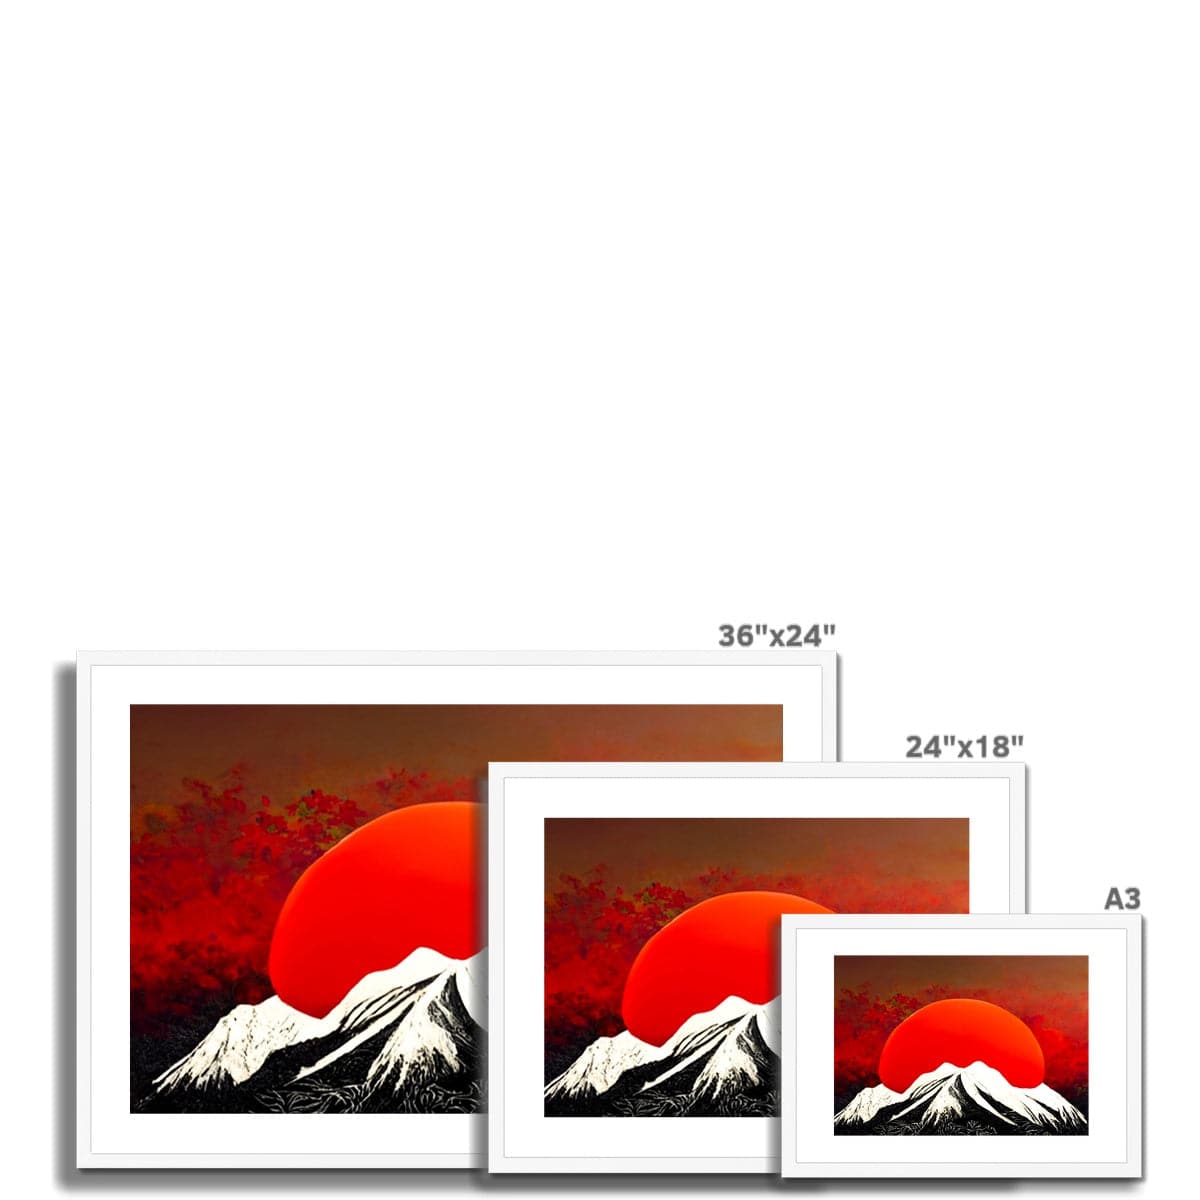 Fire Snow Mountain Framed & Mounted Print - Pixel Gallery